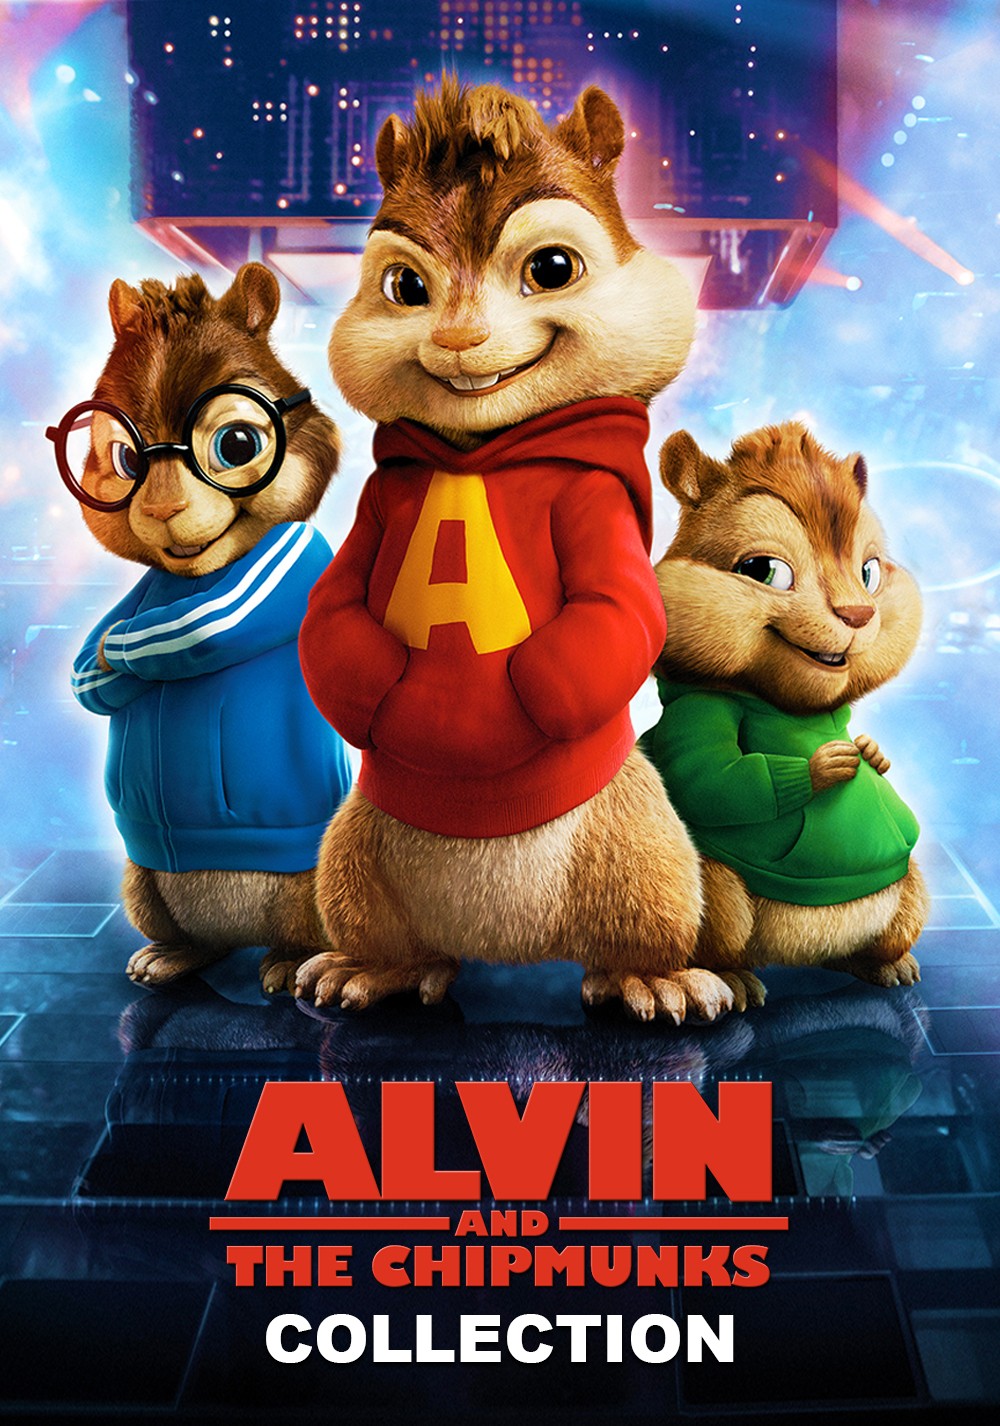 Image Alvin and the Chipmunks in Posters by theo00 album.